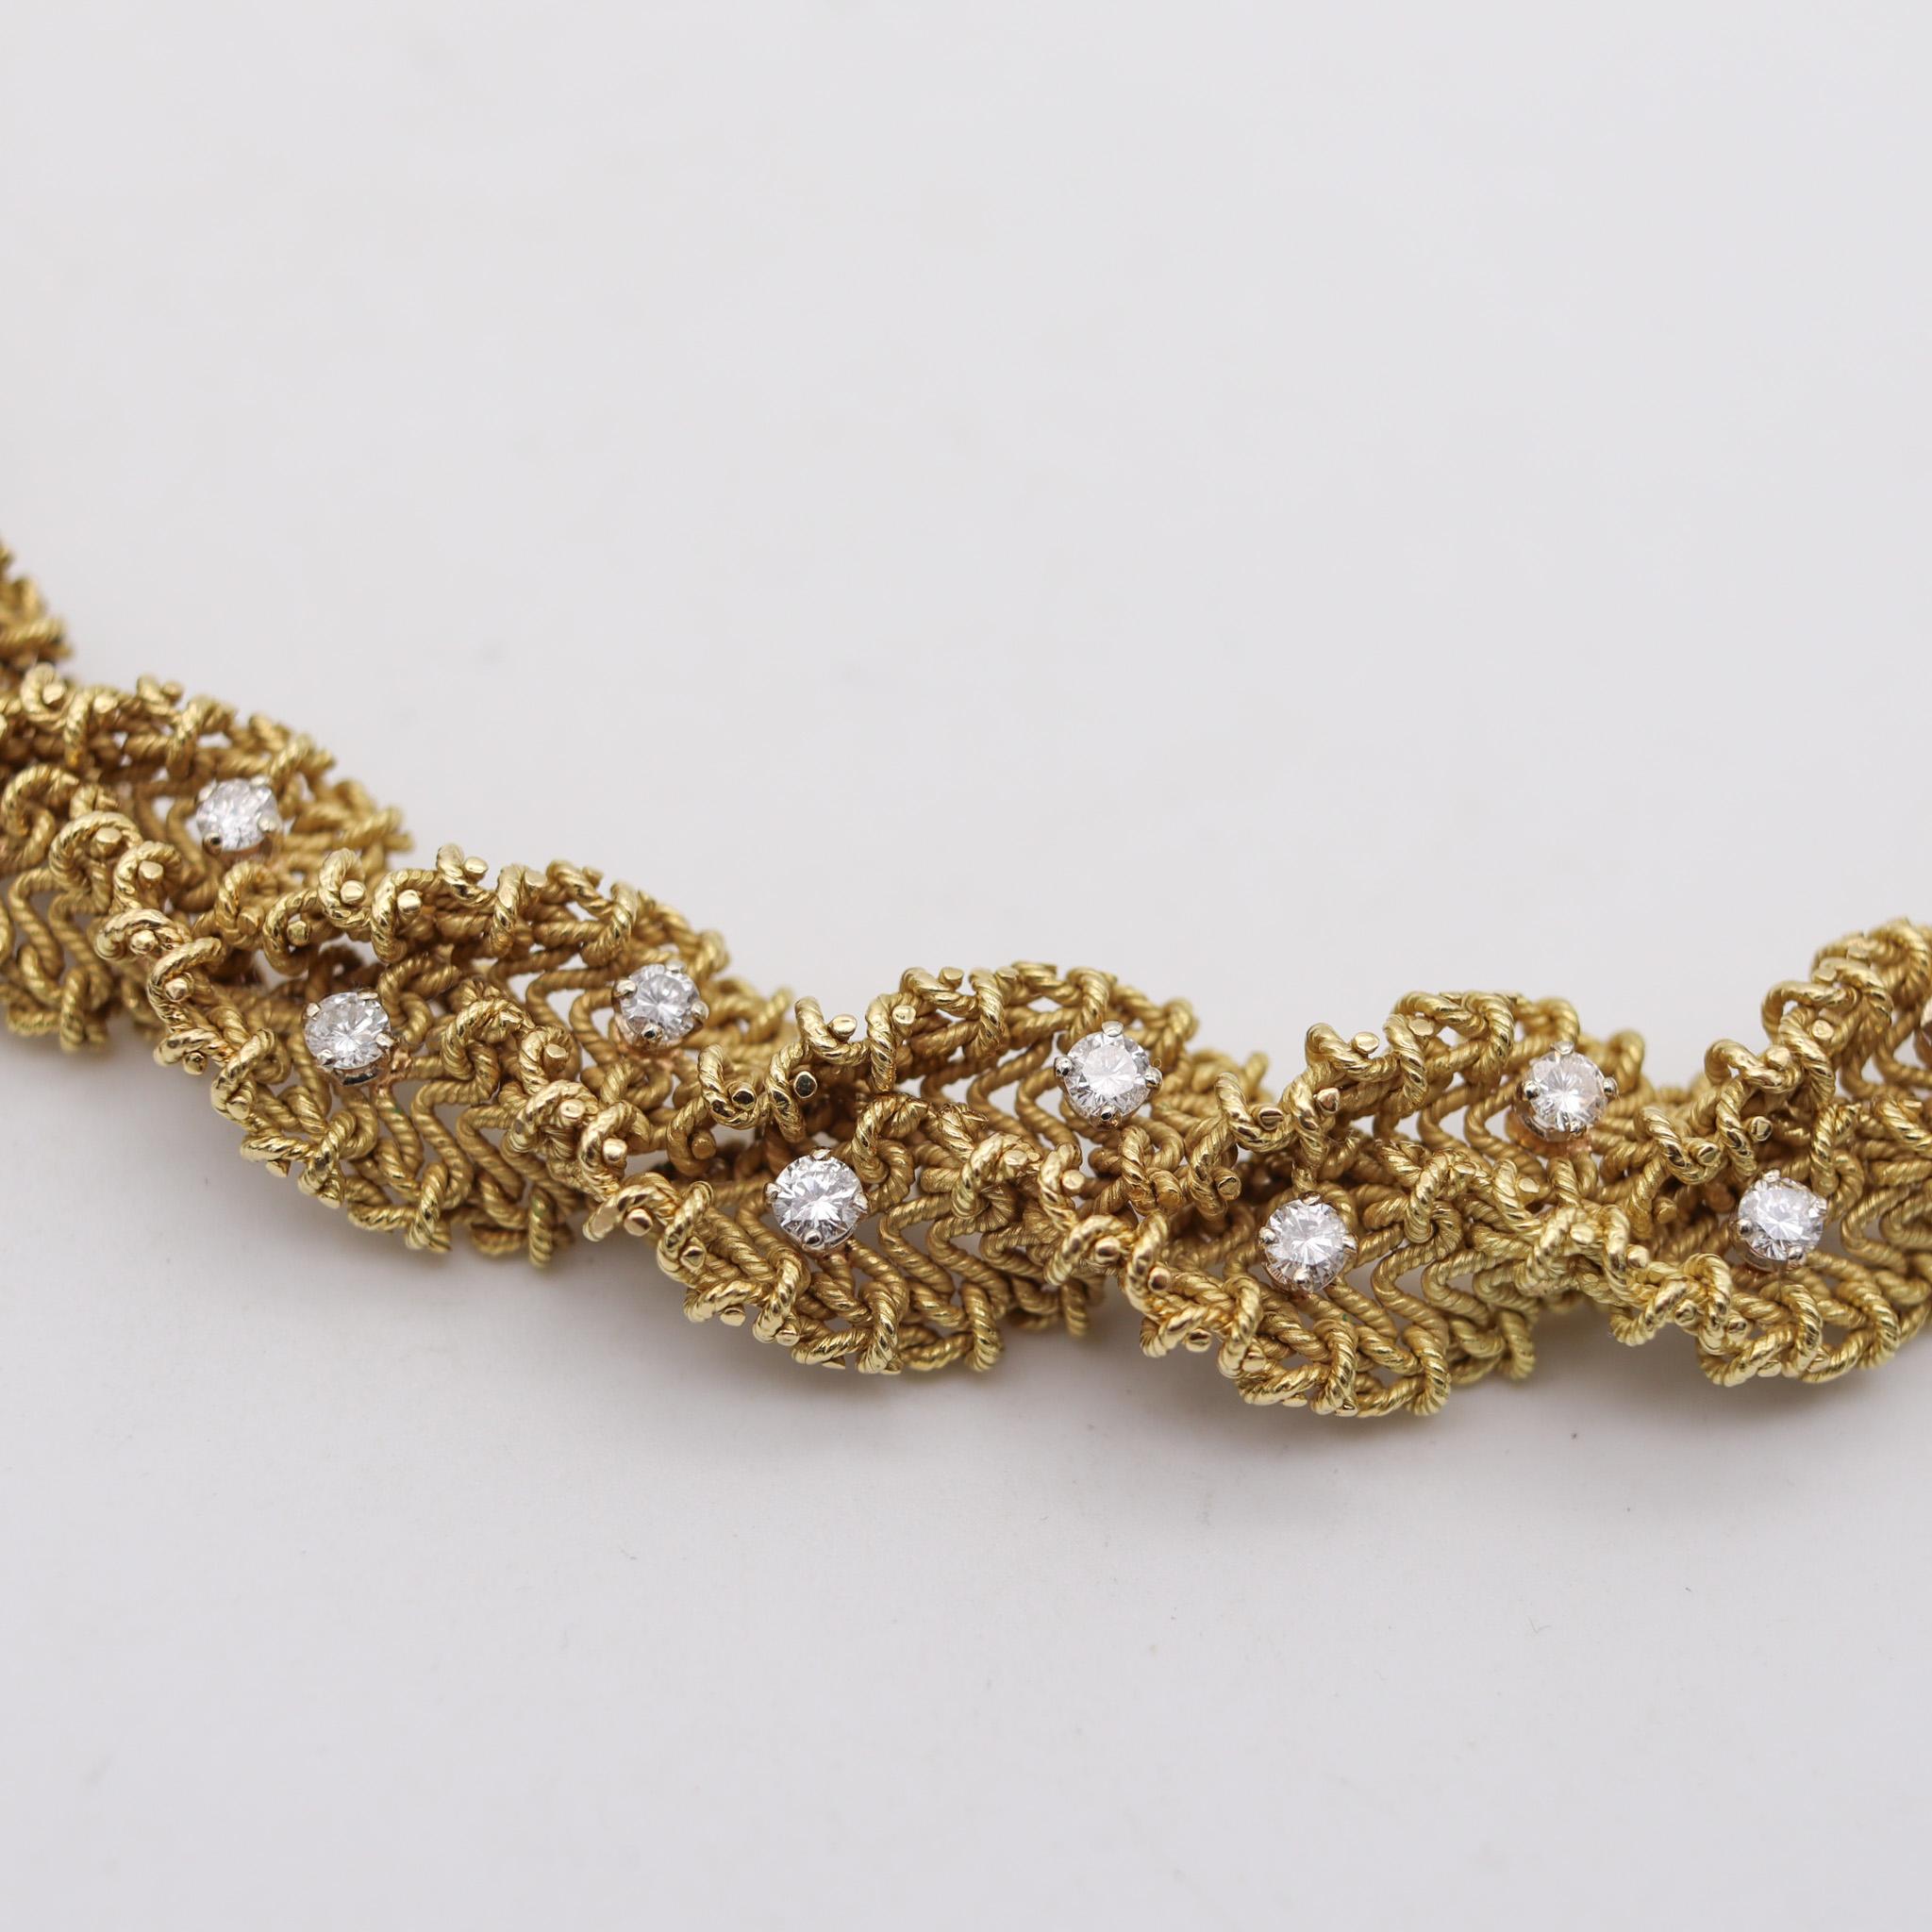 Chantecler 1960 Textured Twisted Necklace In 18Kt Gold With 5.15 Ctw In Diamonds In Excellent Condition For Sale In Miami, FL